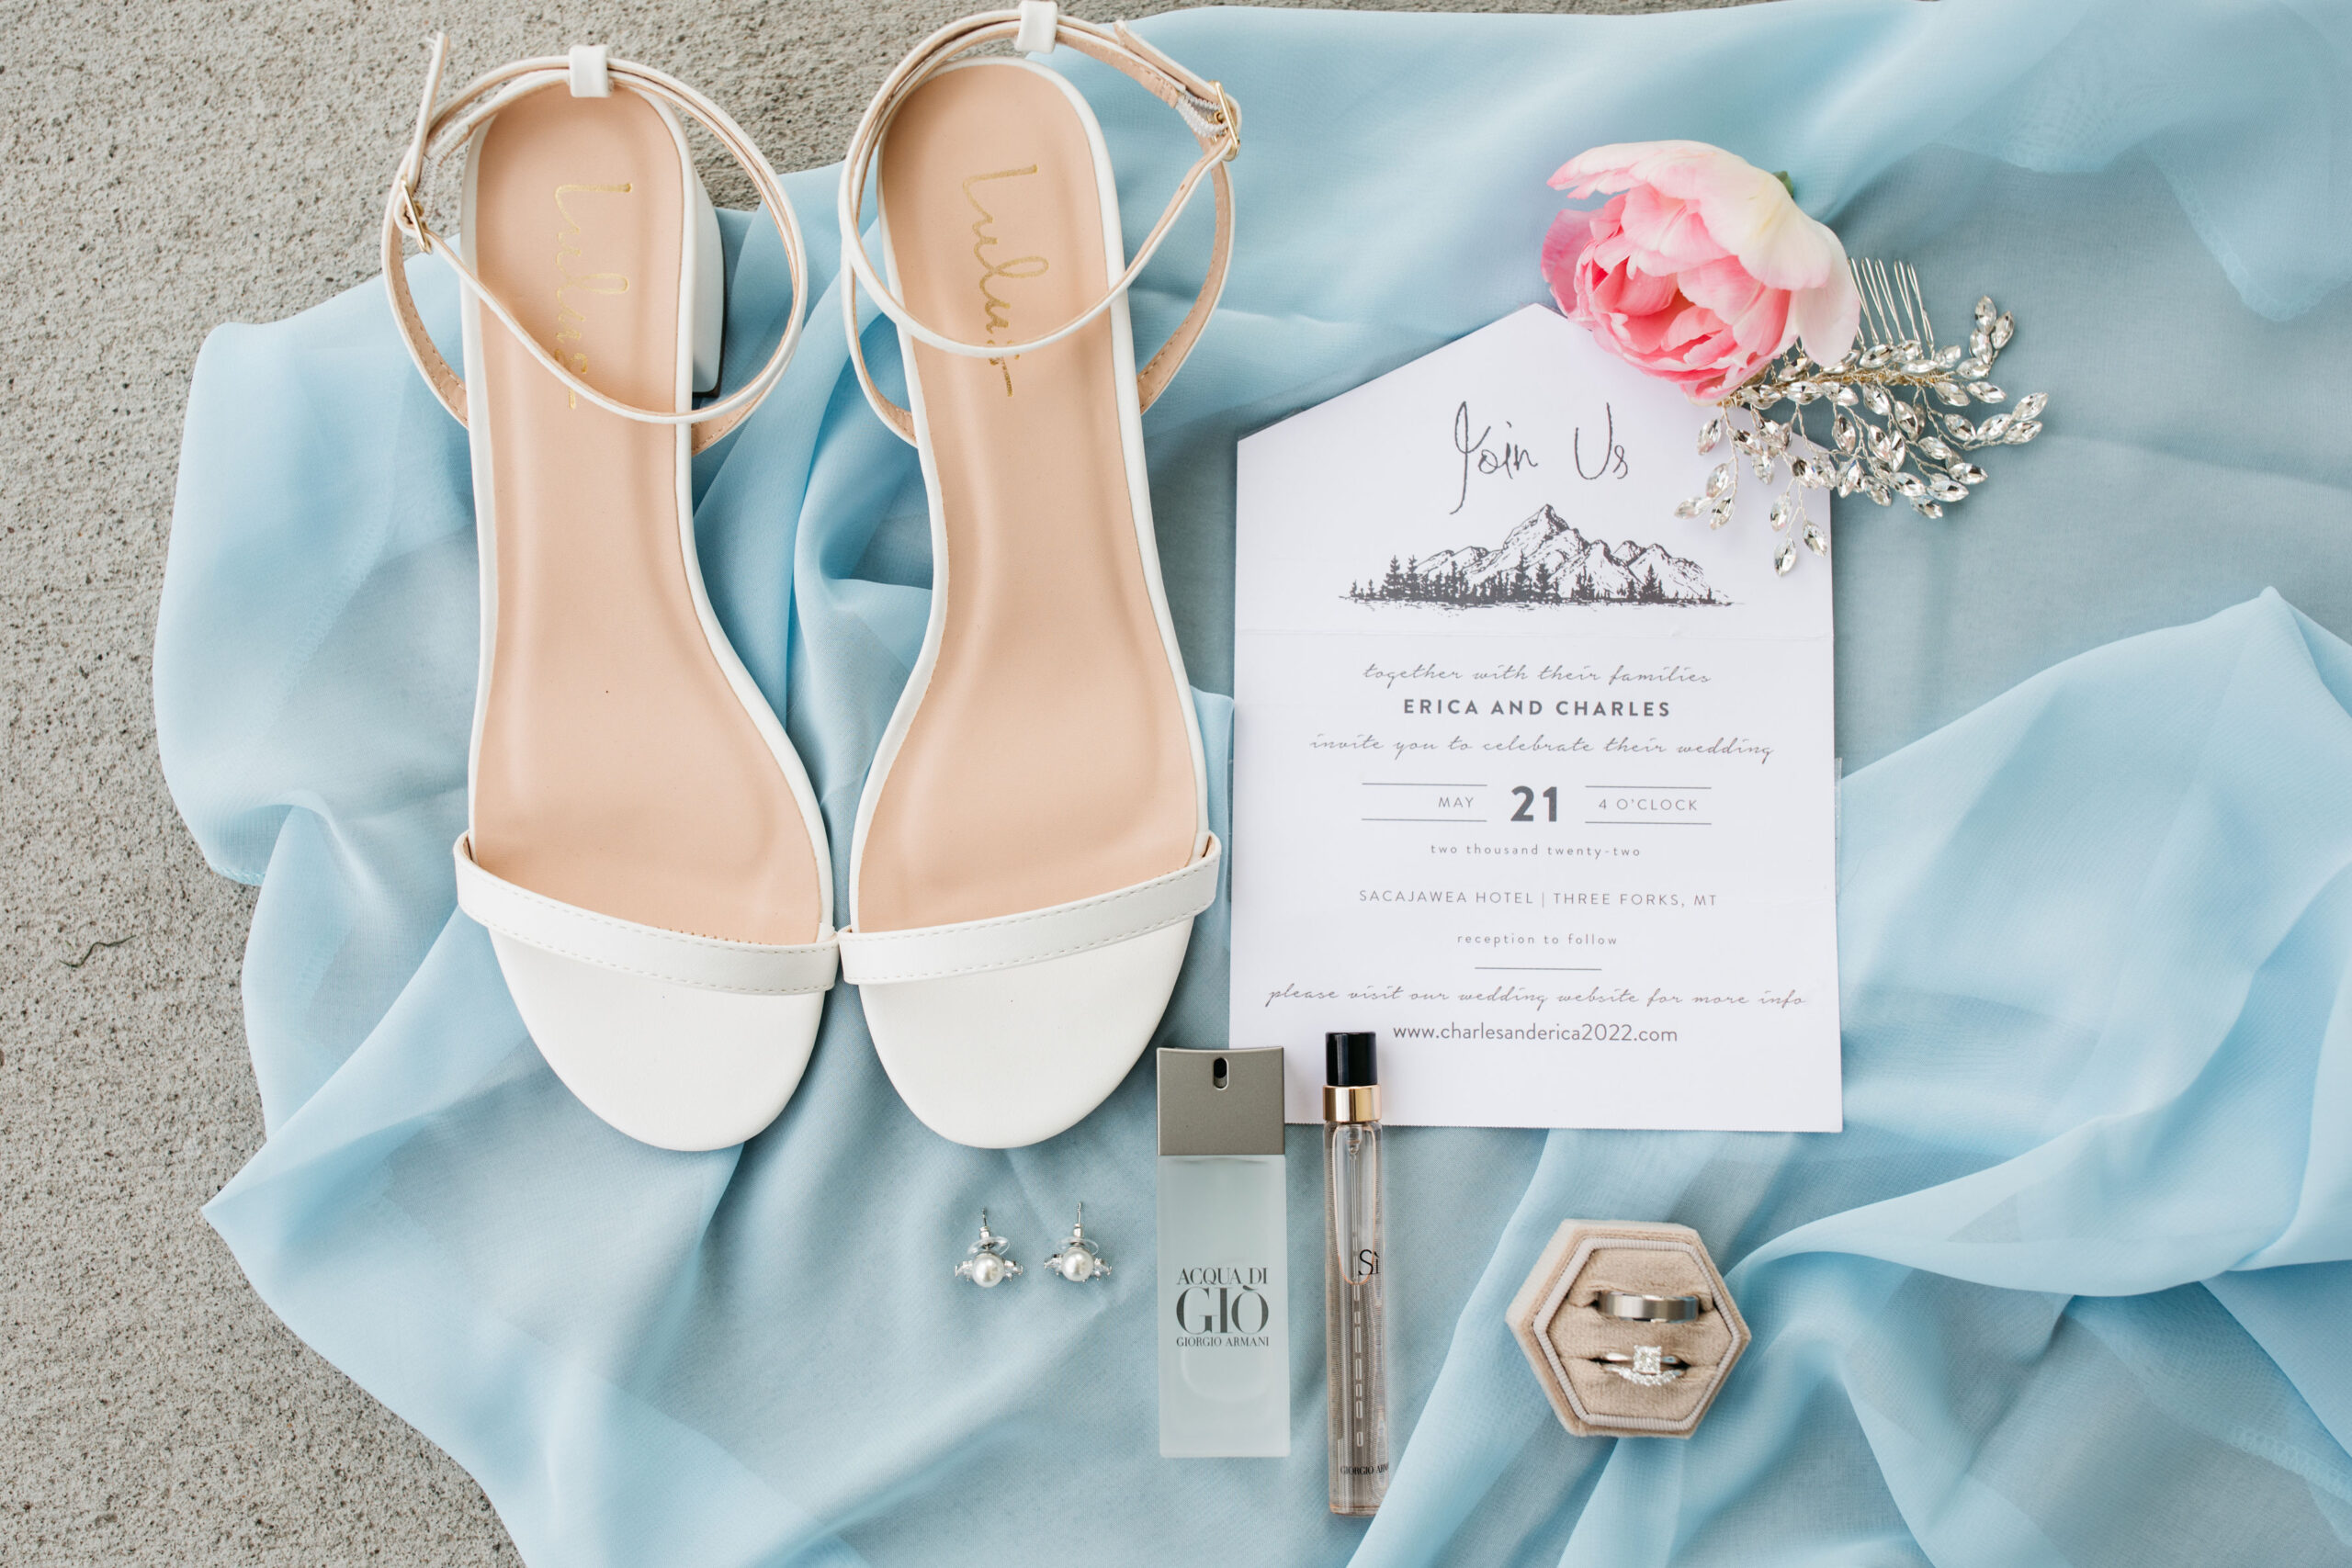 3 reasons to hire a wedding content creator